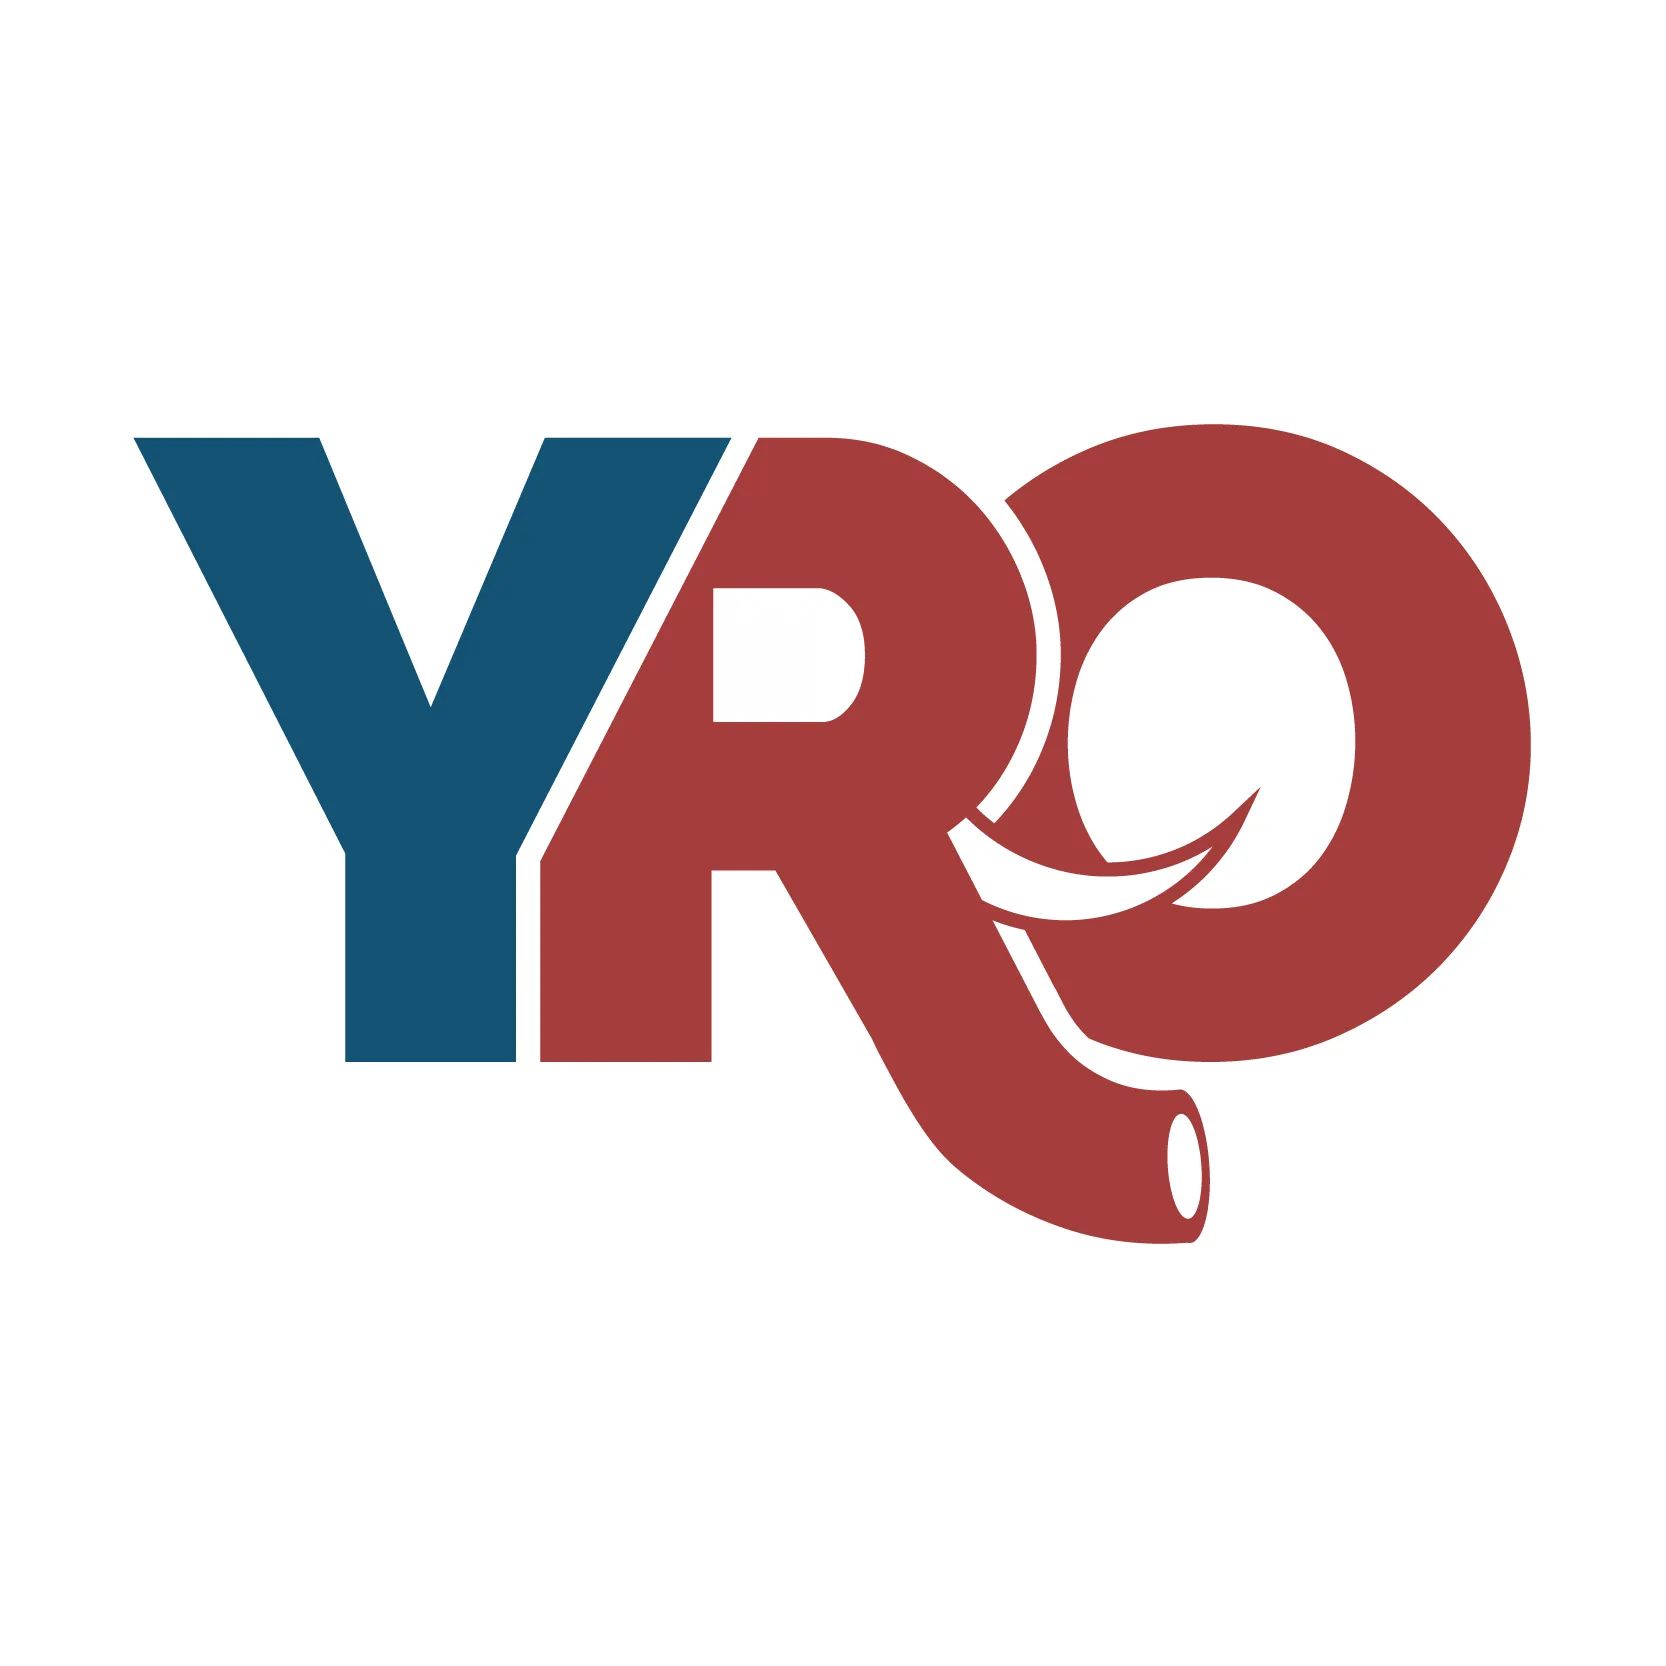 Listen – Young Republicans of Oregon Podcast: YRO in the capital, a conversation with State Representatives